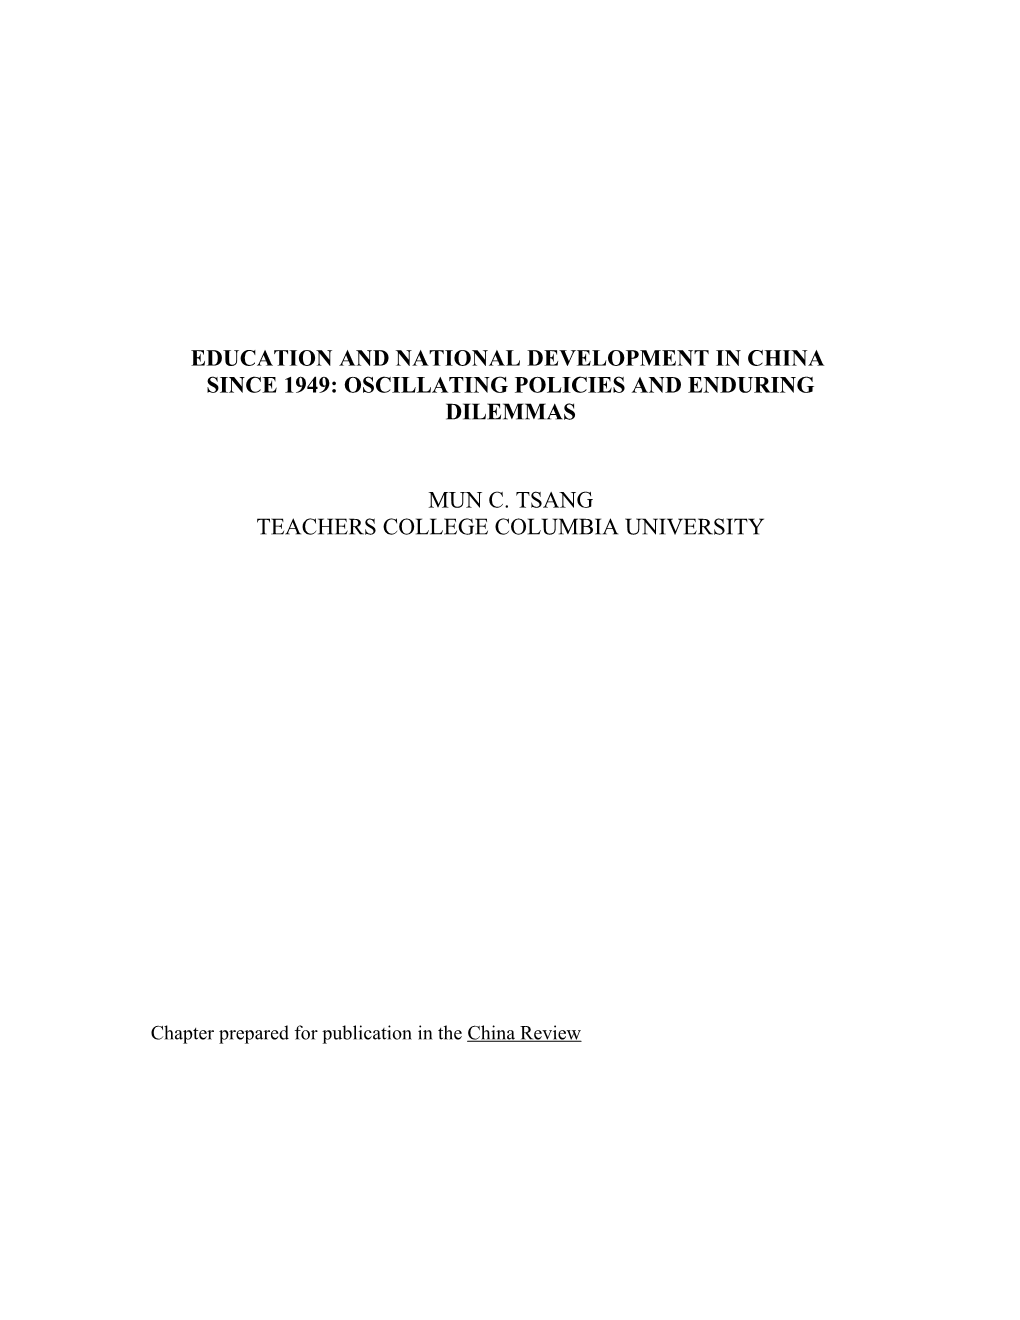 Education and National Development in China